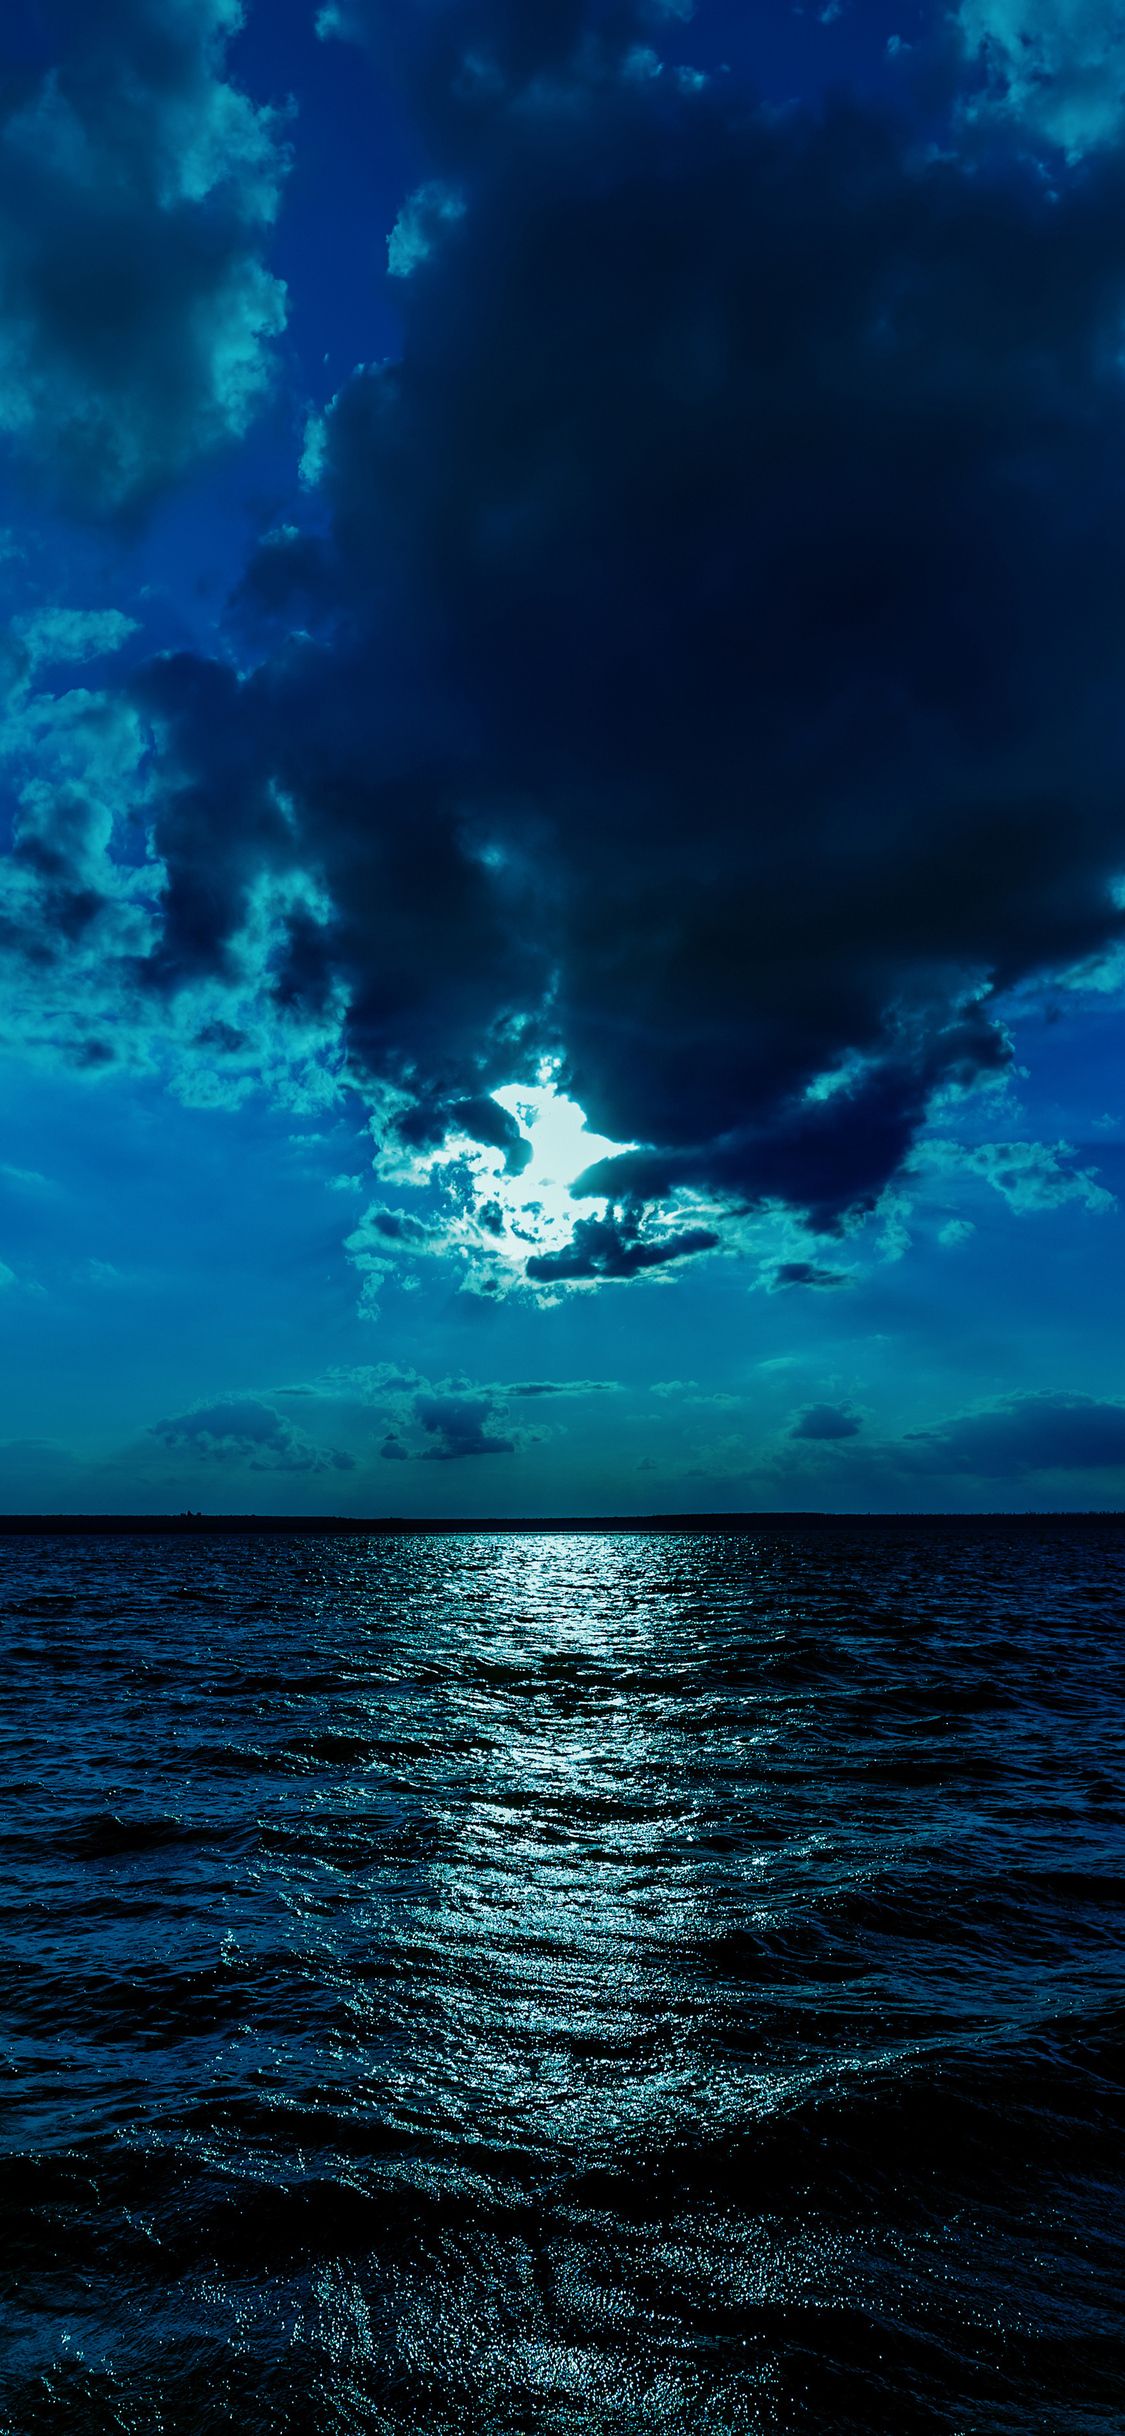 Night Moon Sea Sky Blue 4k iPhone XS, iPhone iPhone X HD 4k Wallpaper, Image, Background, Photo and Picture